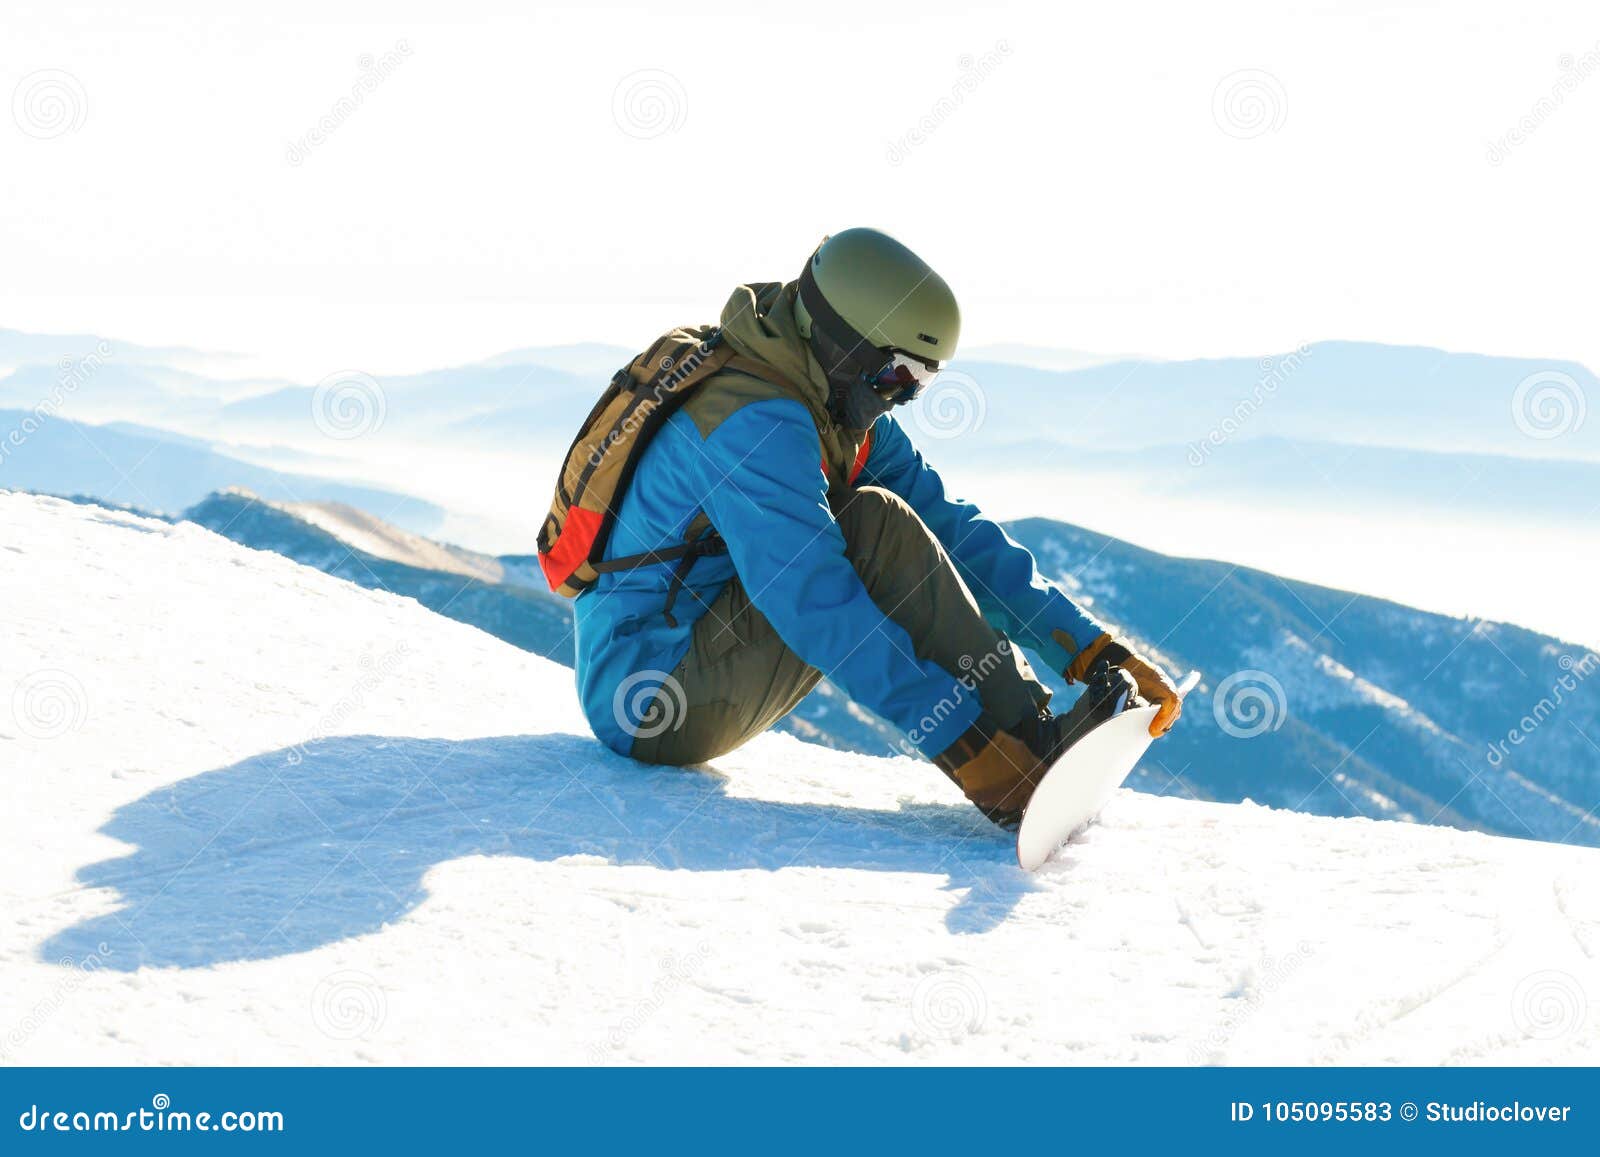 Young Snowboarder Tightening His Bindings Stock Image - Image of ...